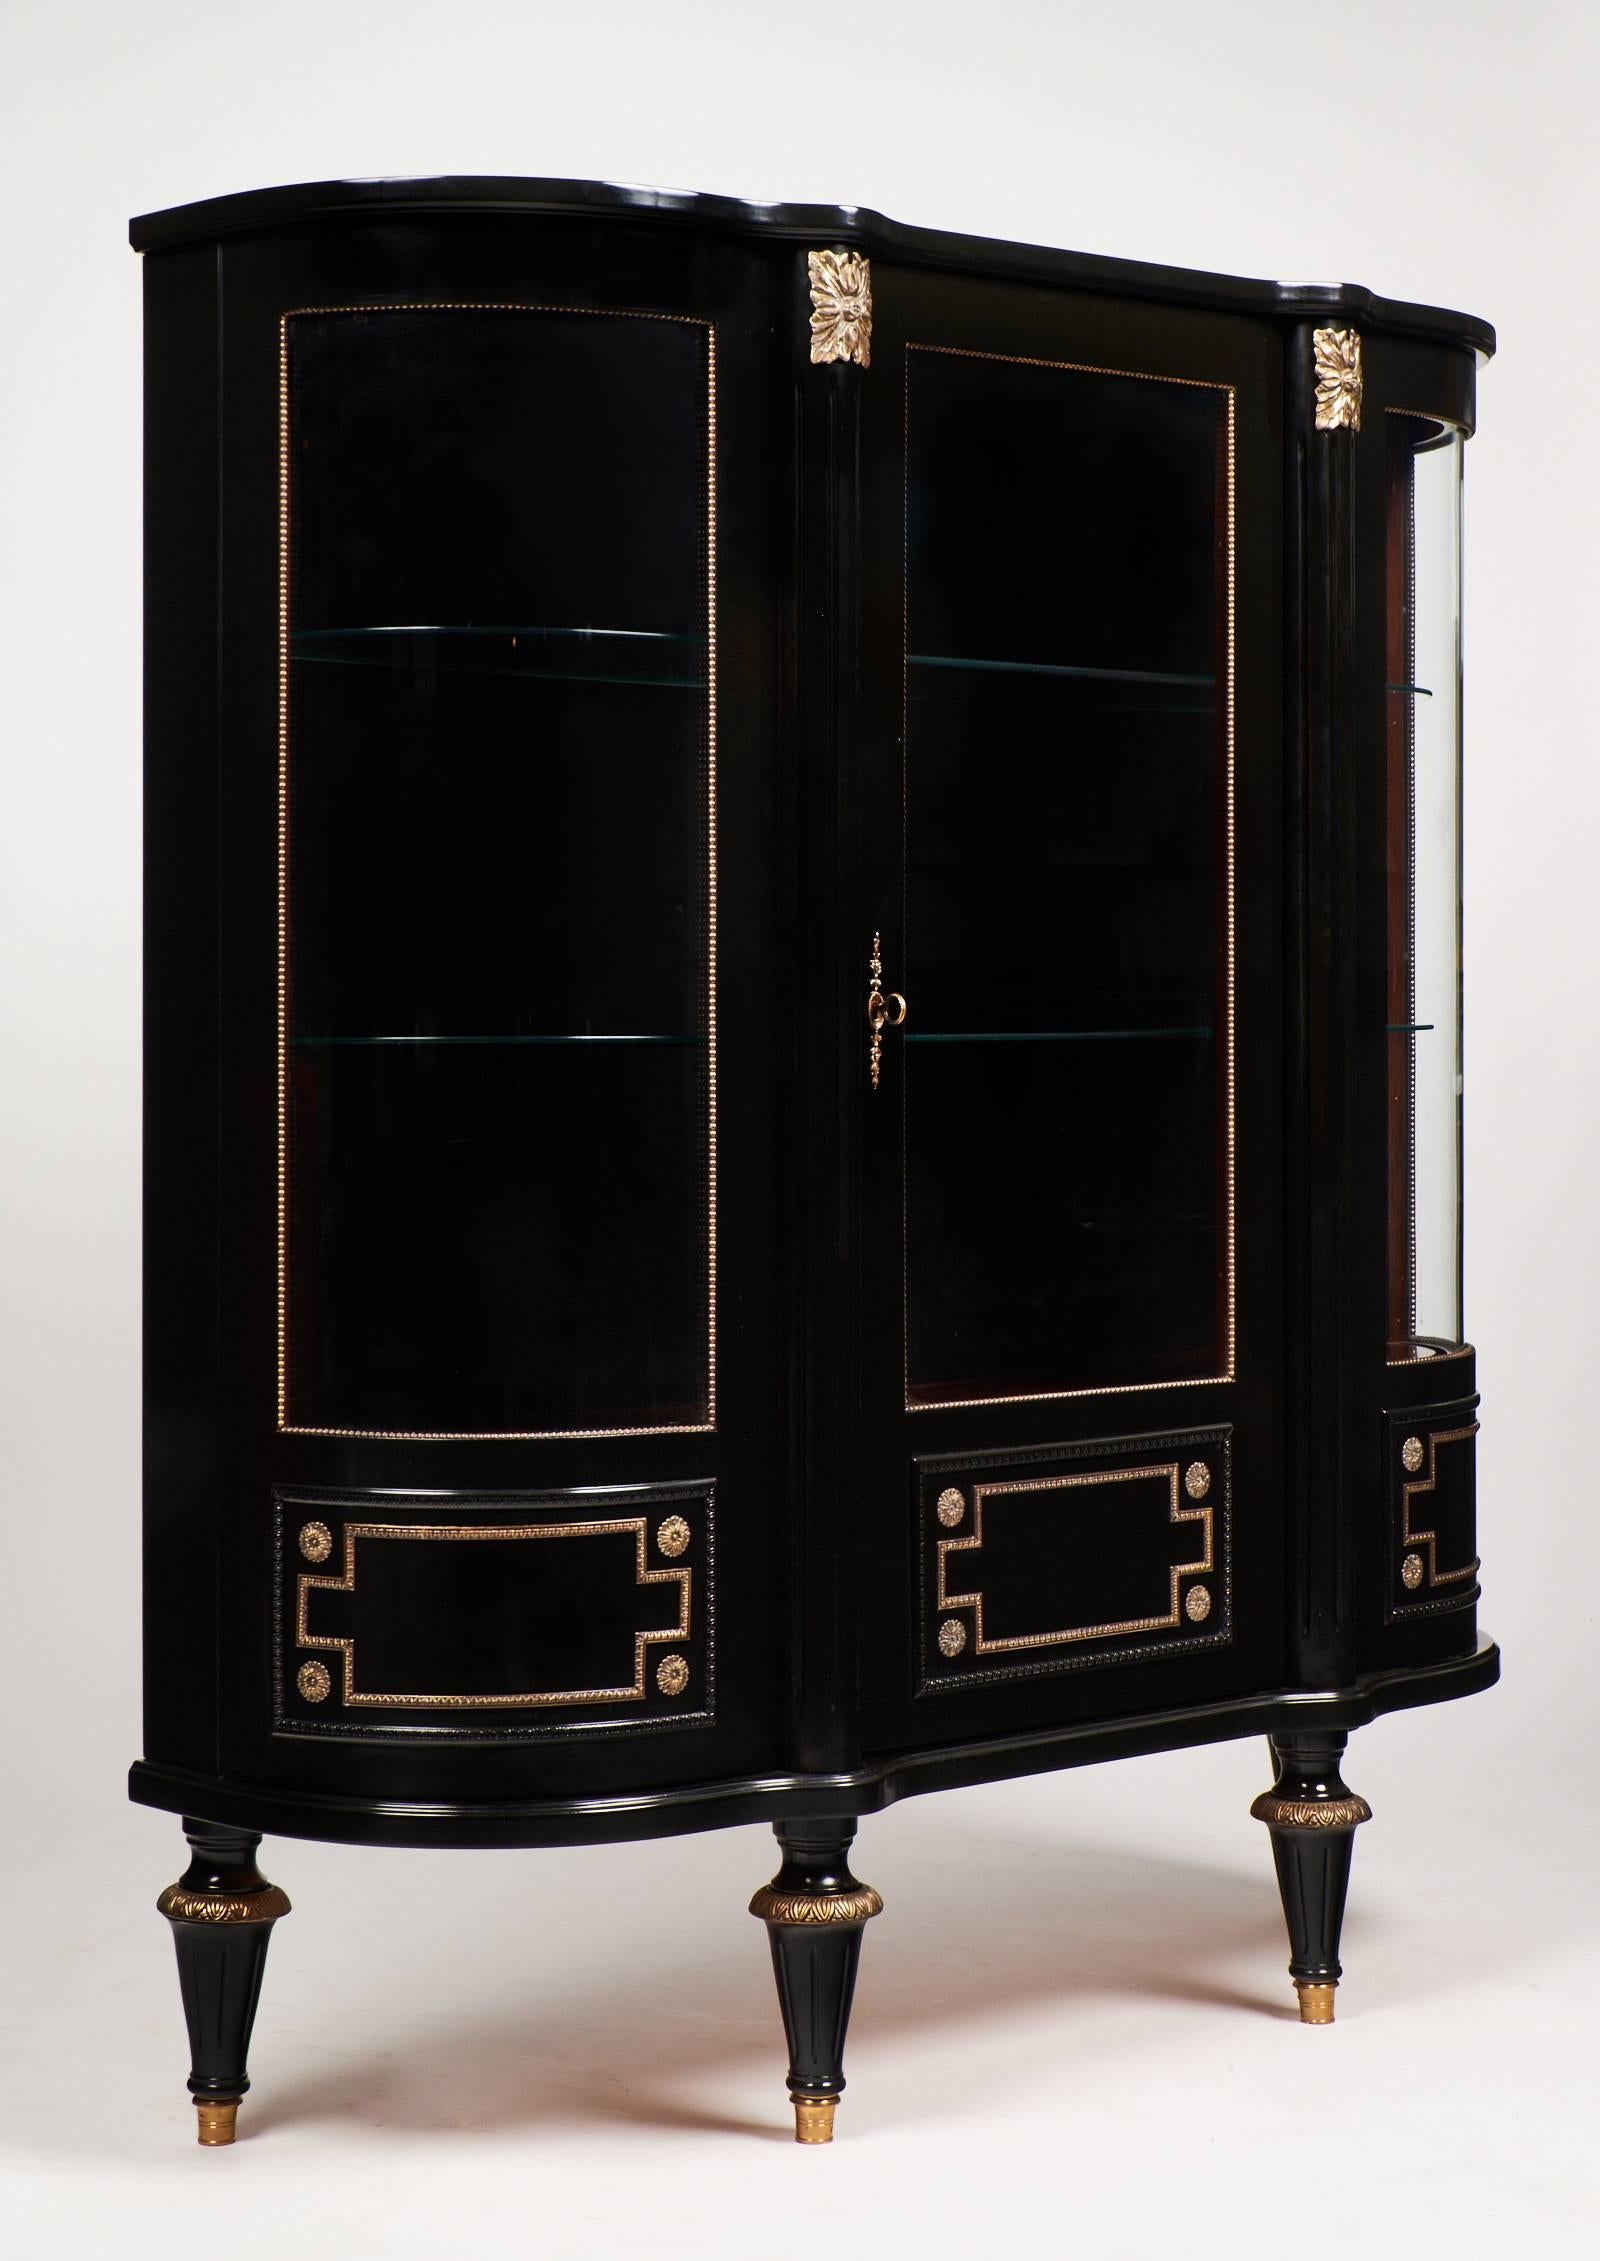 Mahogany vitrine ebonized with a lustrous French polish. All original glass doors, curved sides and shelves with all original hardware.